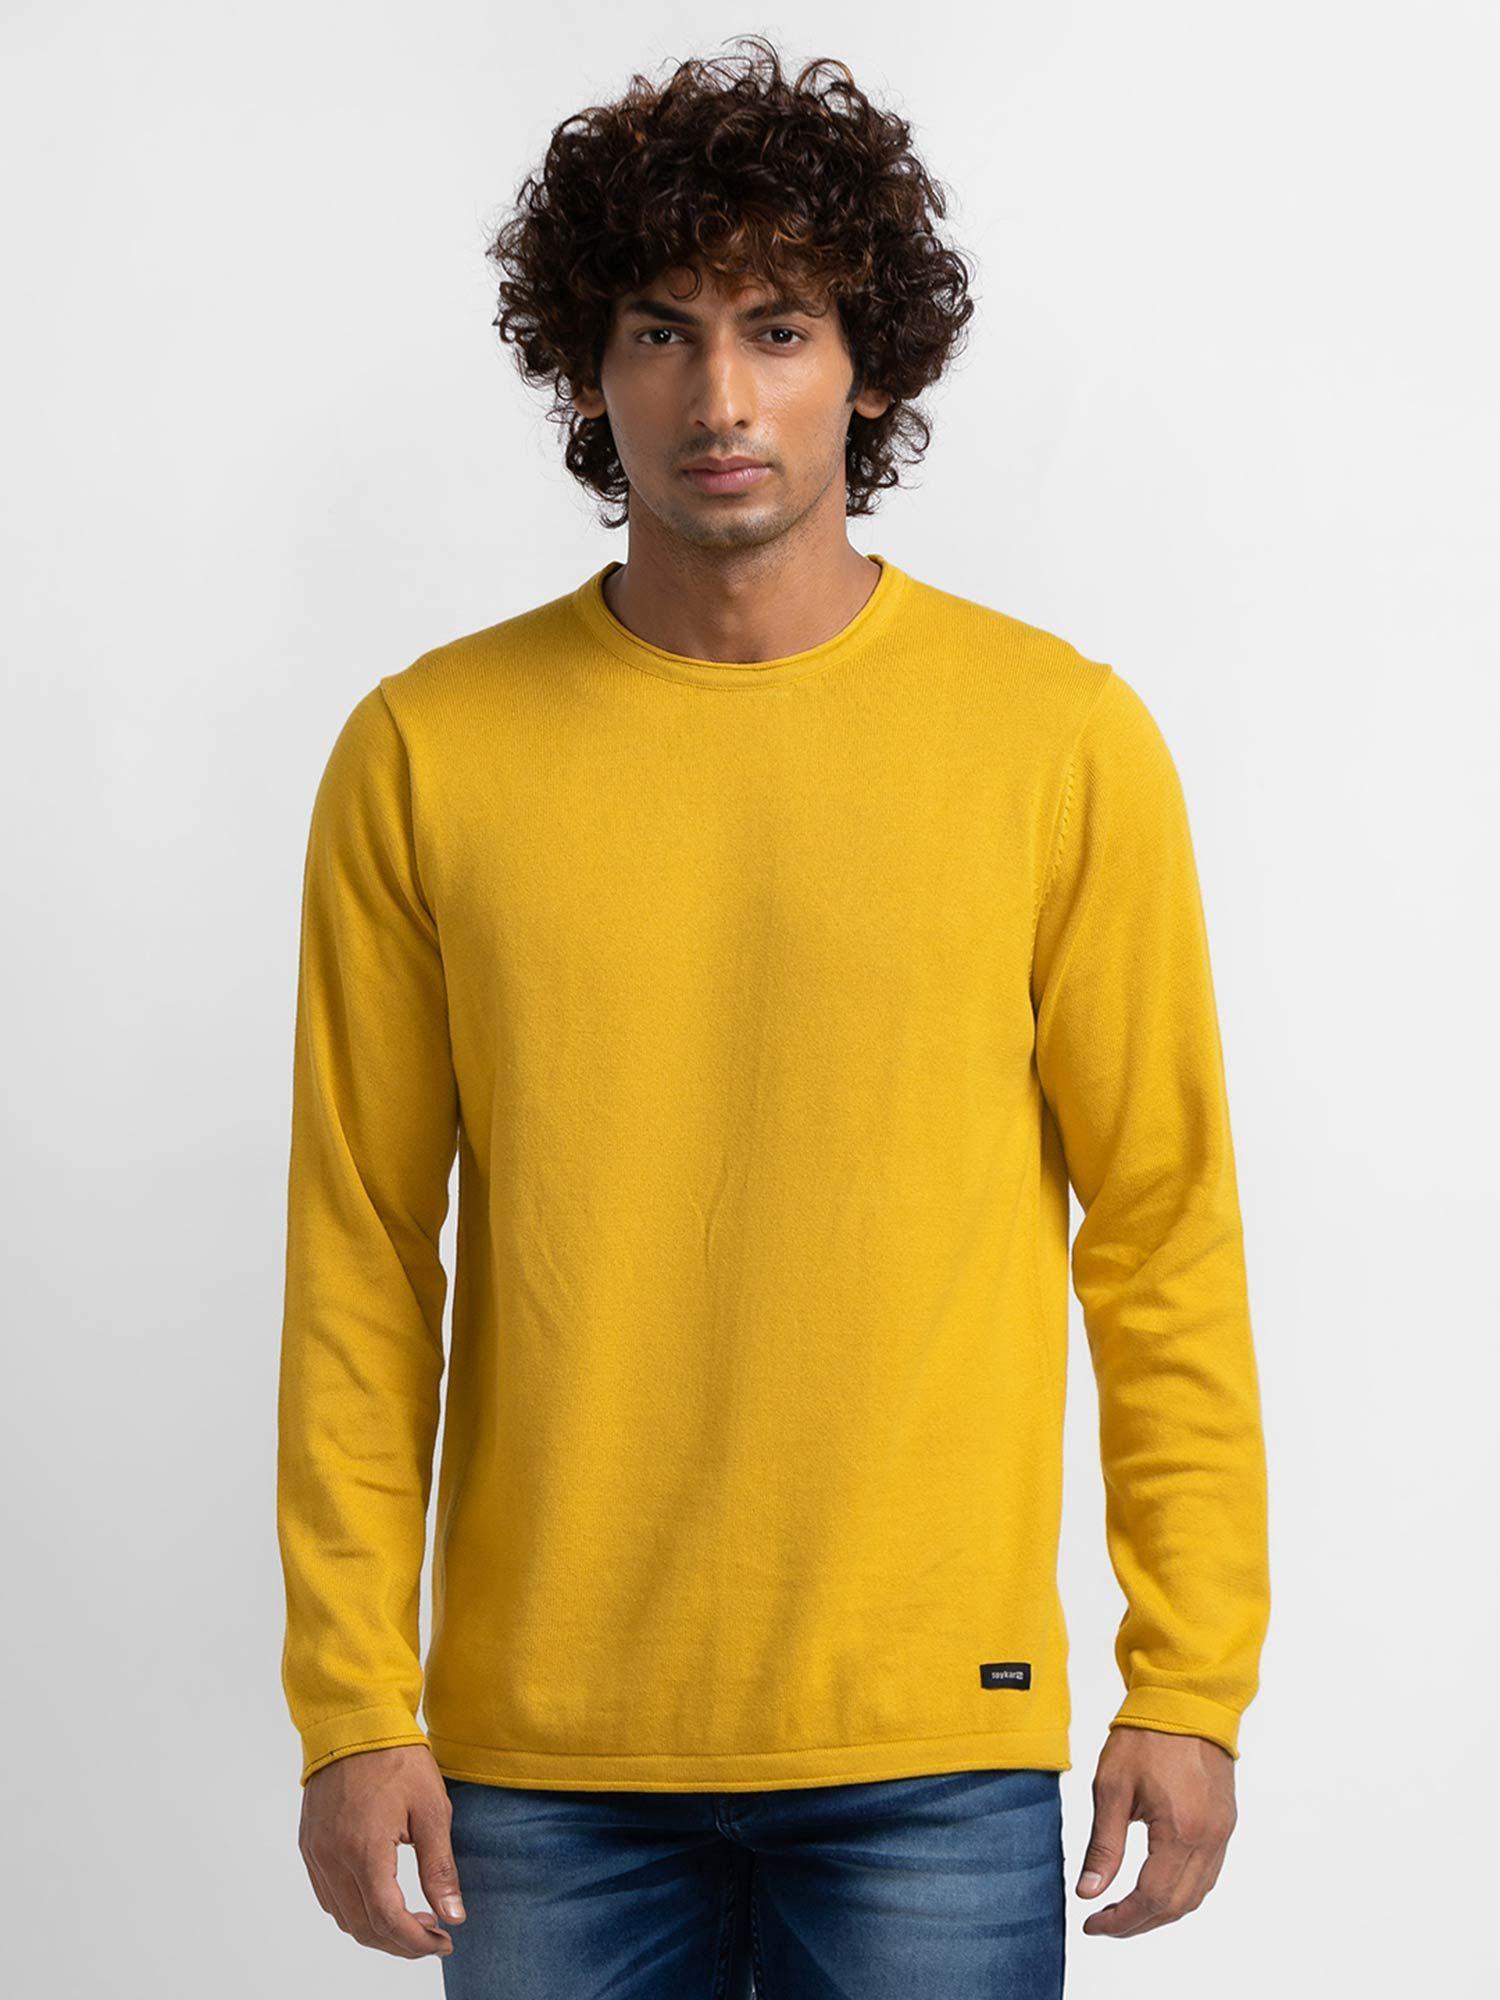 Sulphur Yellow Cotton Full Sleeve Casual Sweater for Men